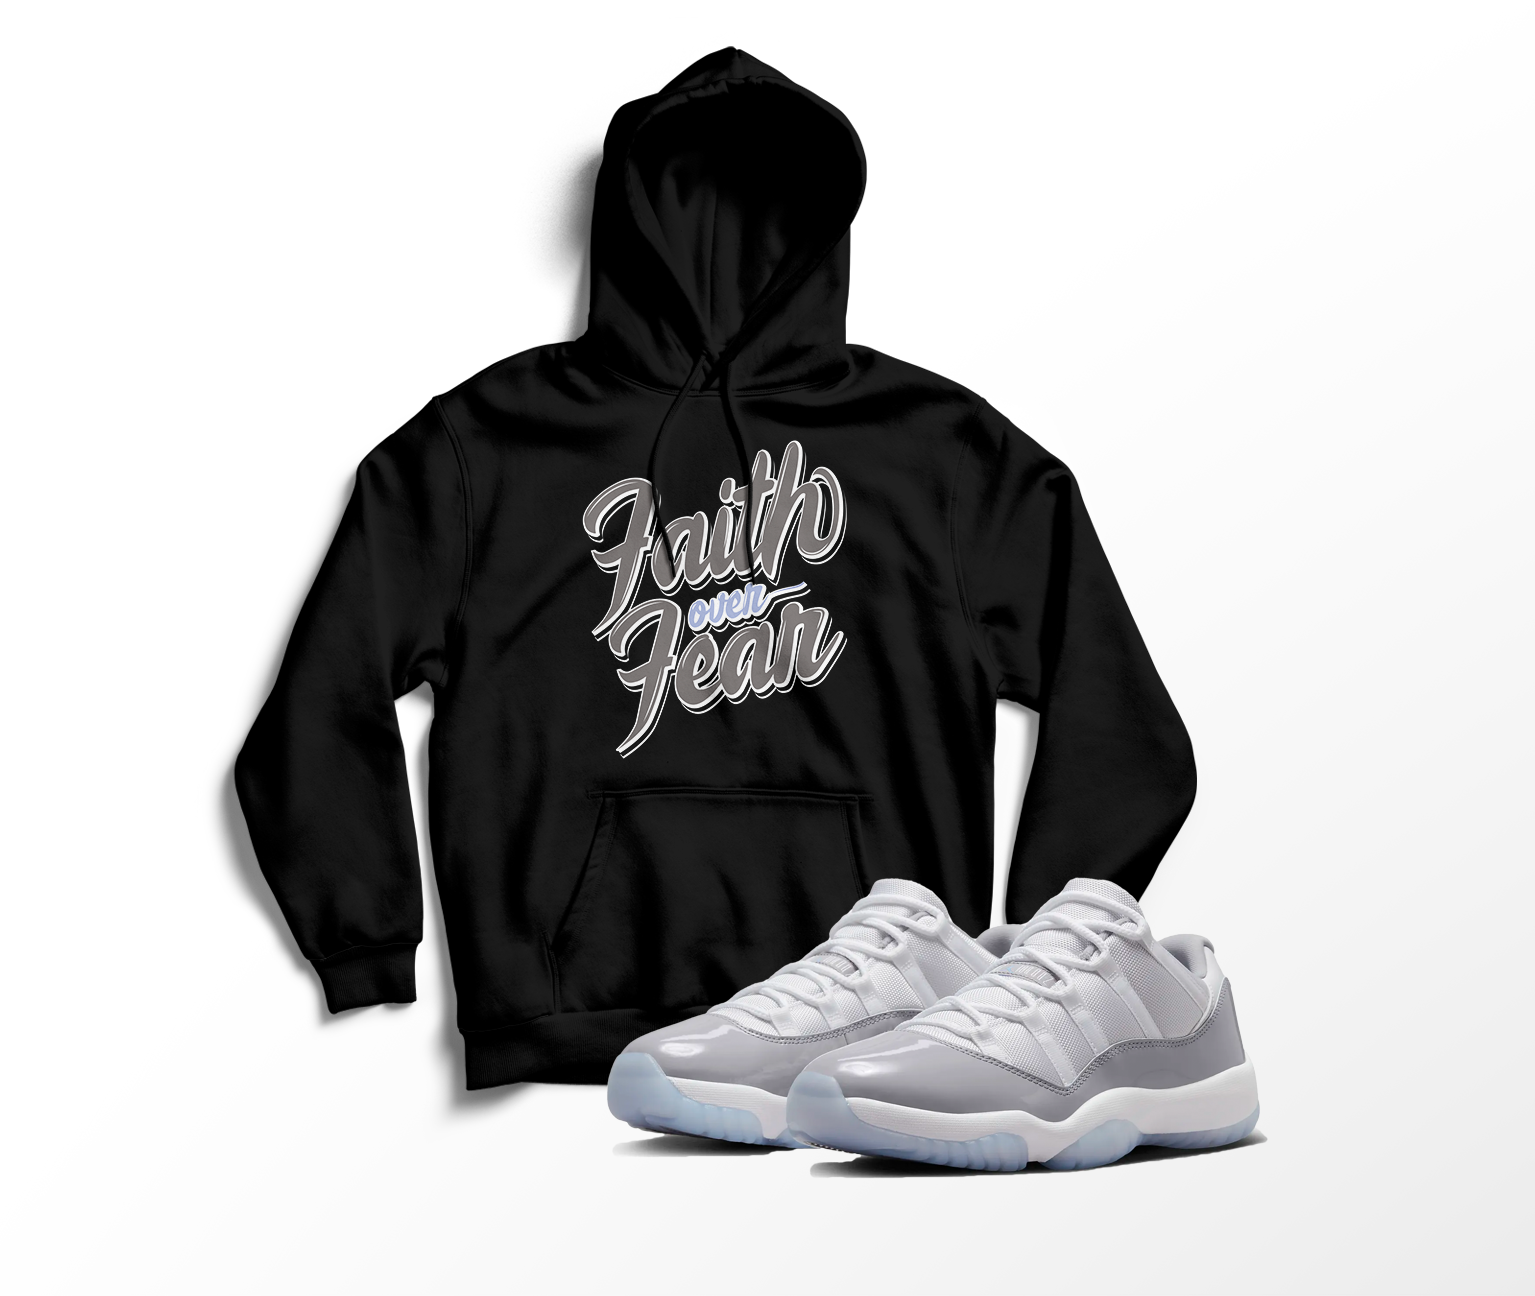 'Faith Over Fear' Custom Graphic Hoodie To Match Air Jordan 11 Low Cool Grey